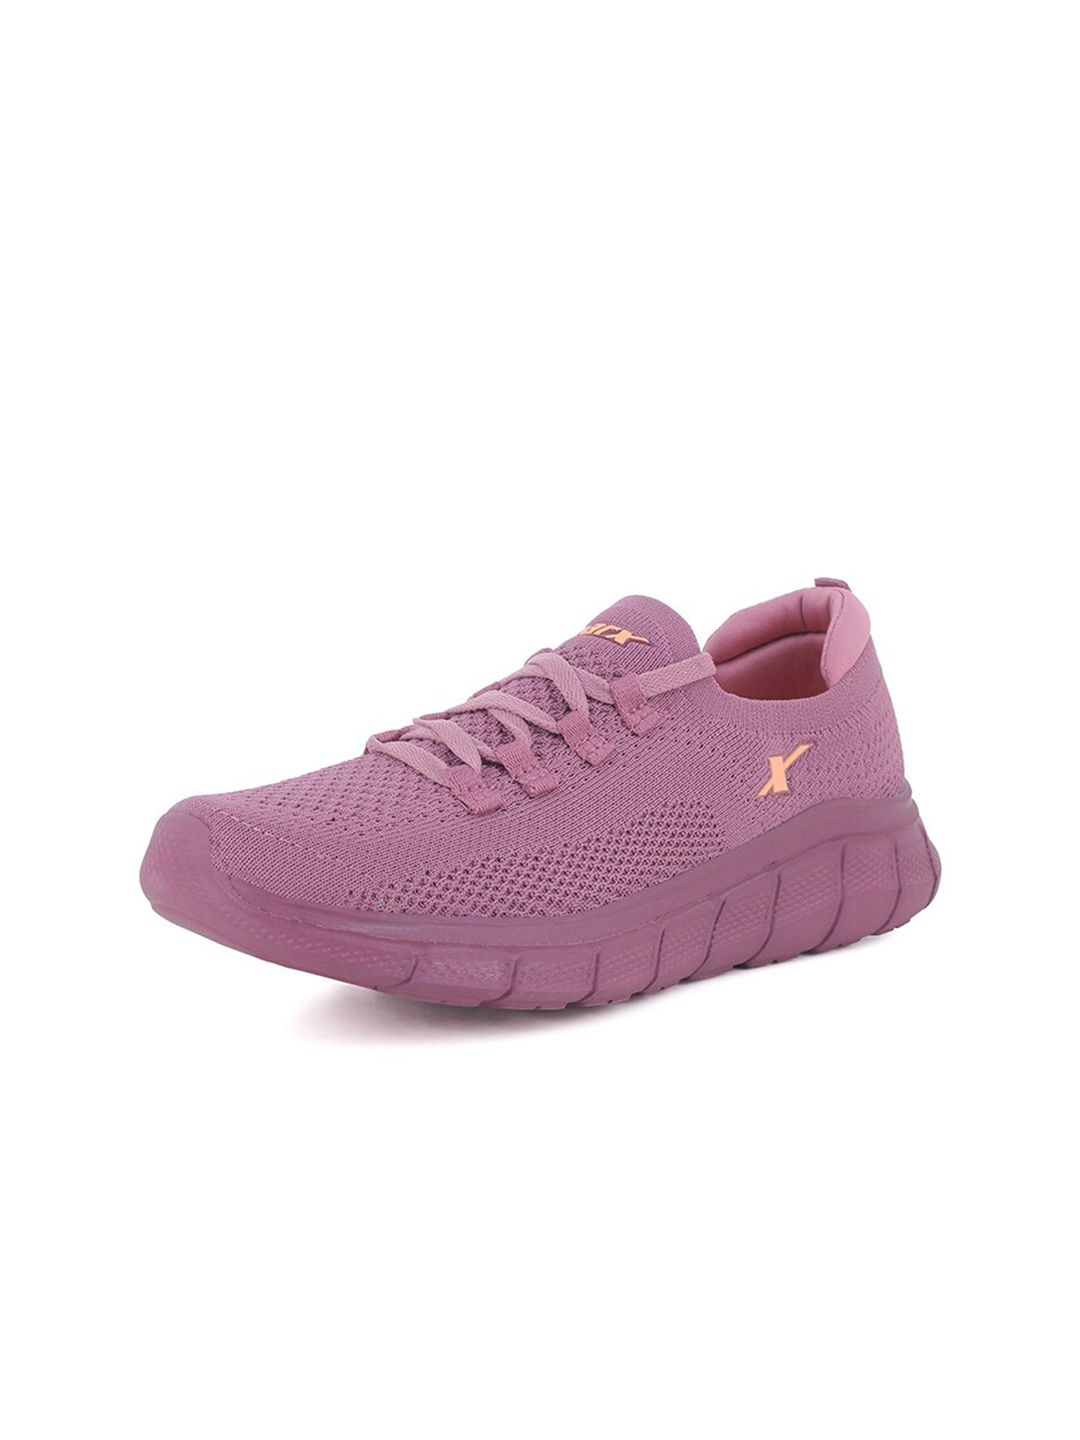 Sparx Women Purple Textile Running Non-Marking Shoes Price in India